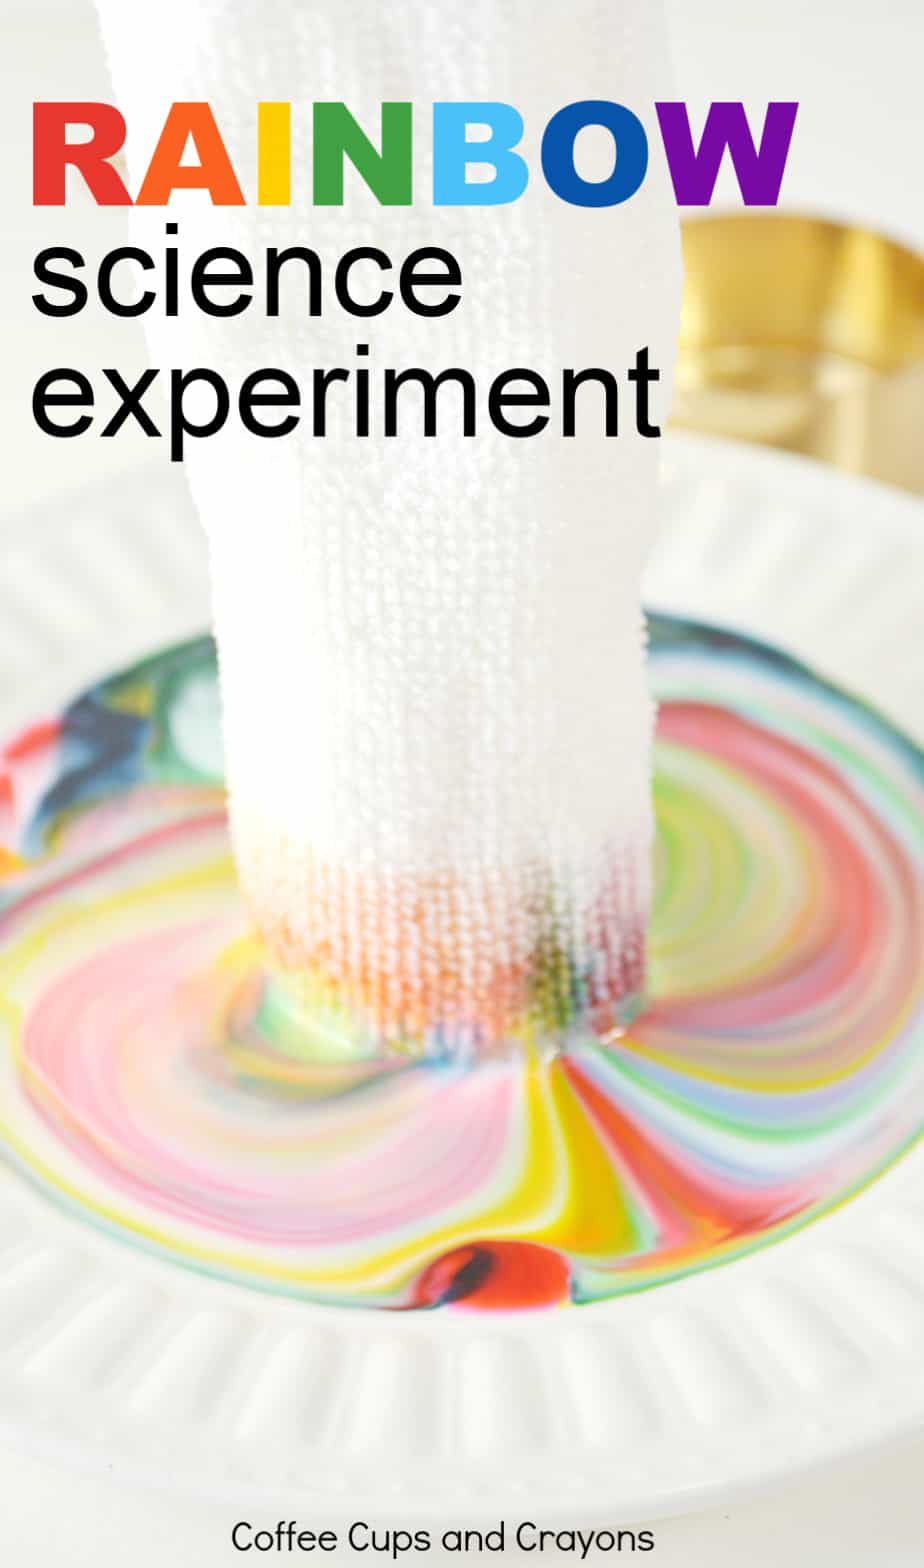 rag being dipped in liquid and food coloring with text Rainbow science experiment